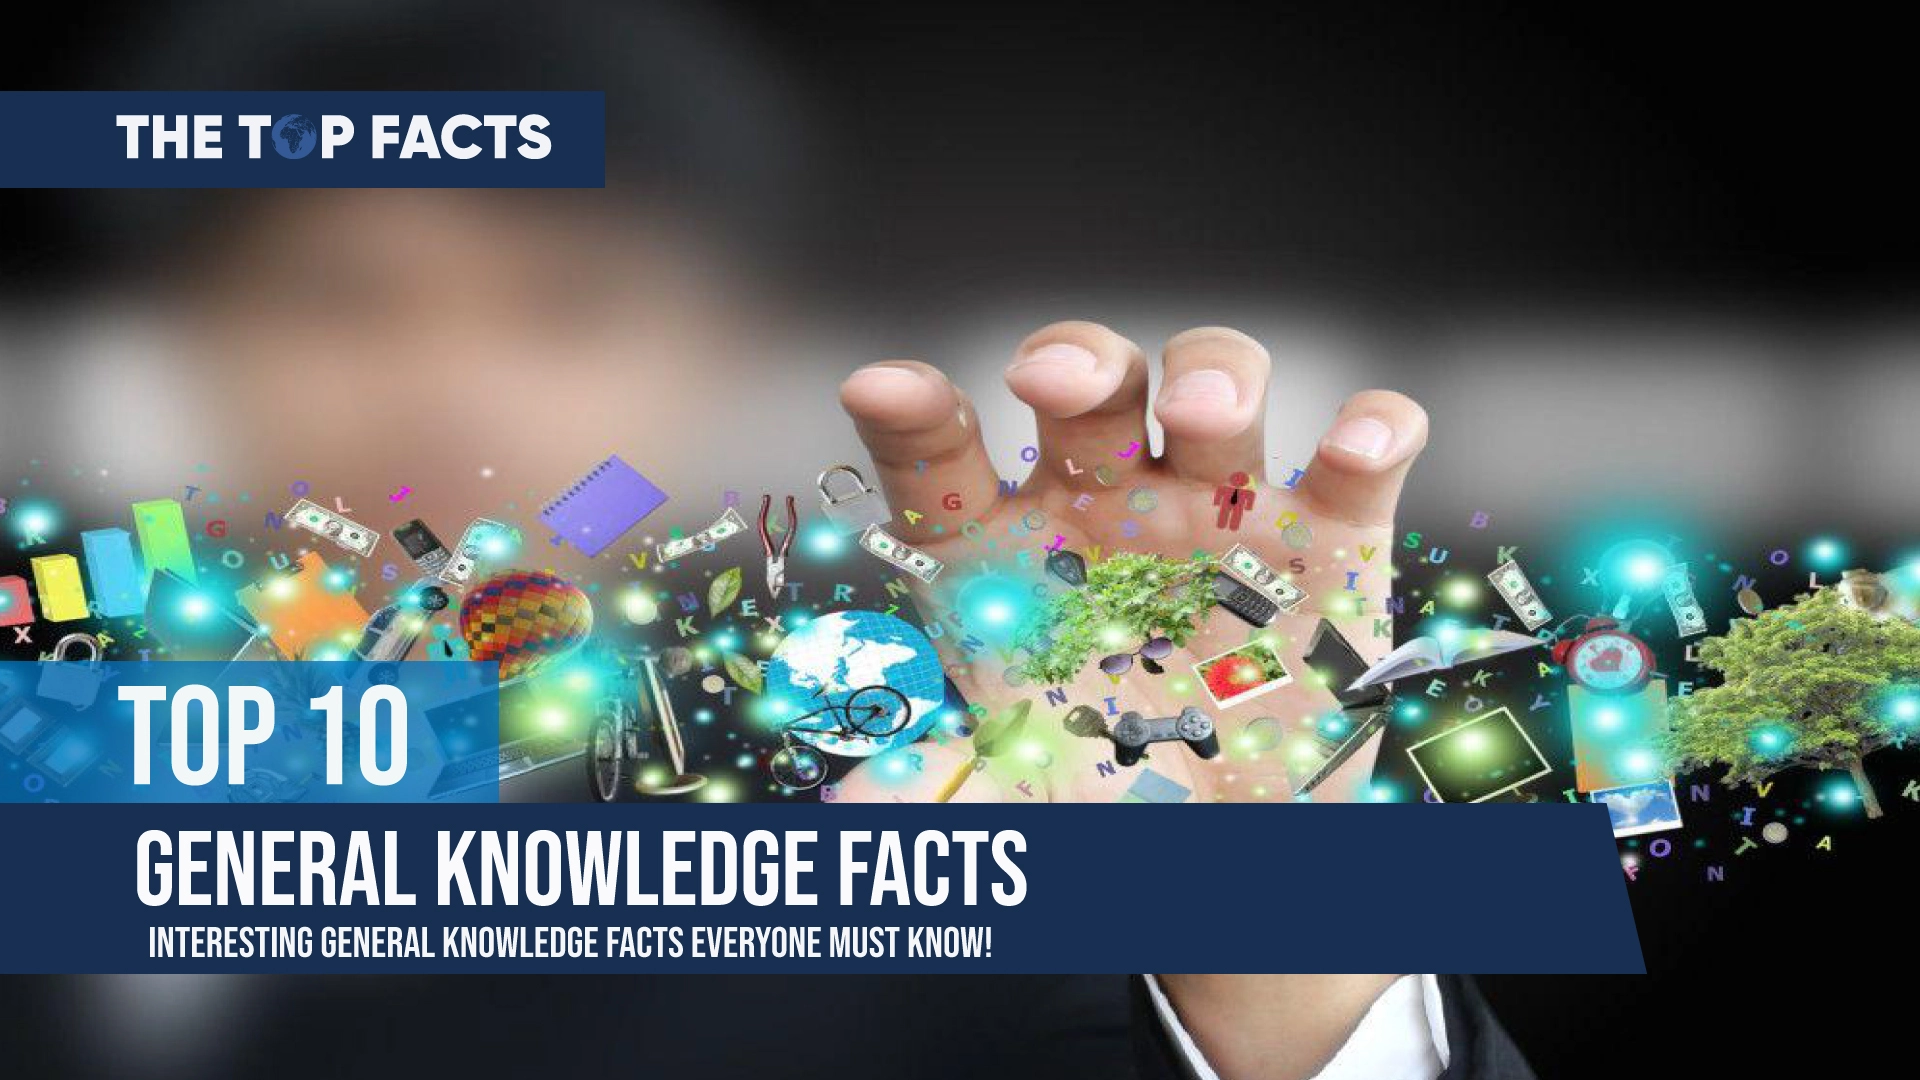 Top 10 General Knowledge Facts